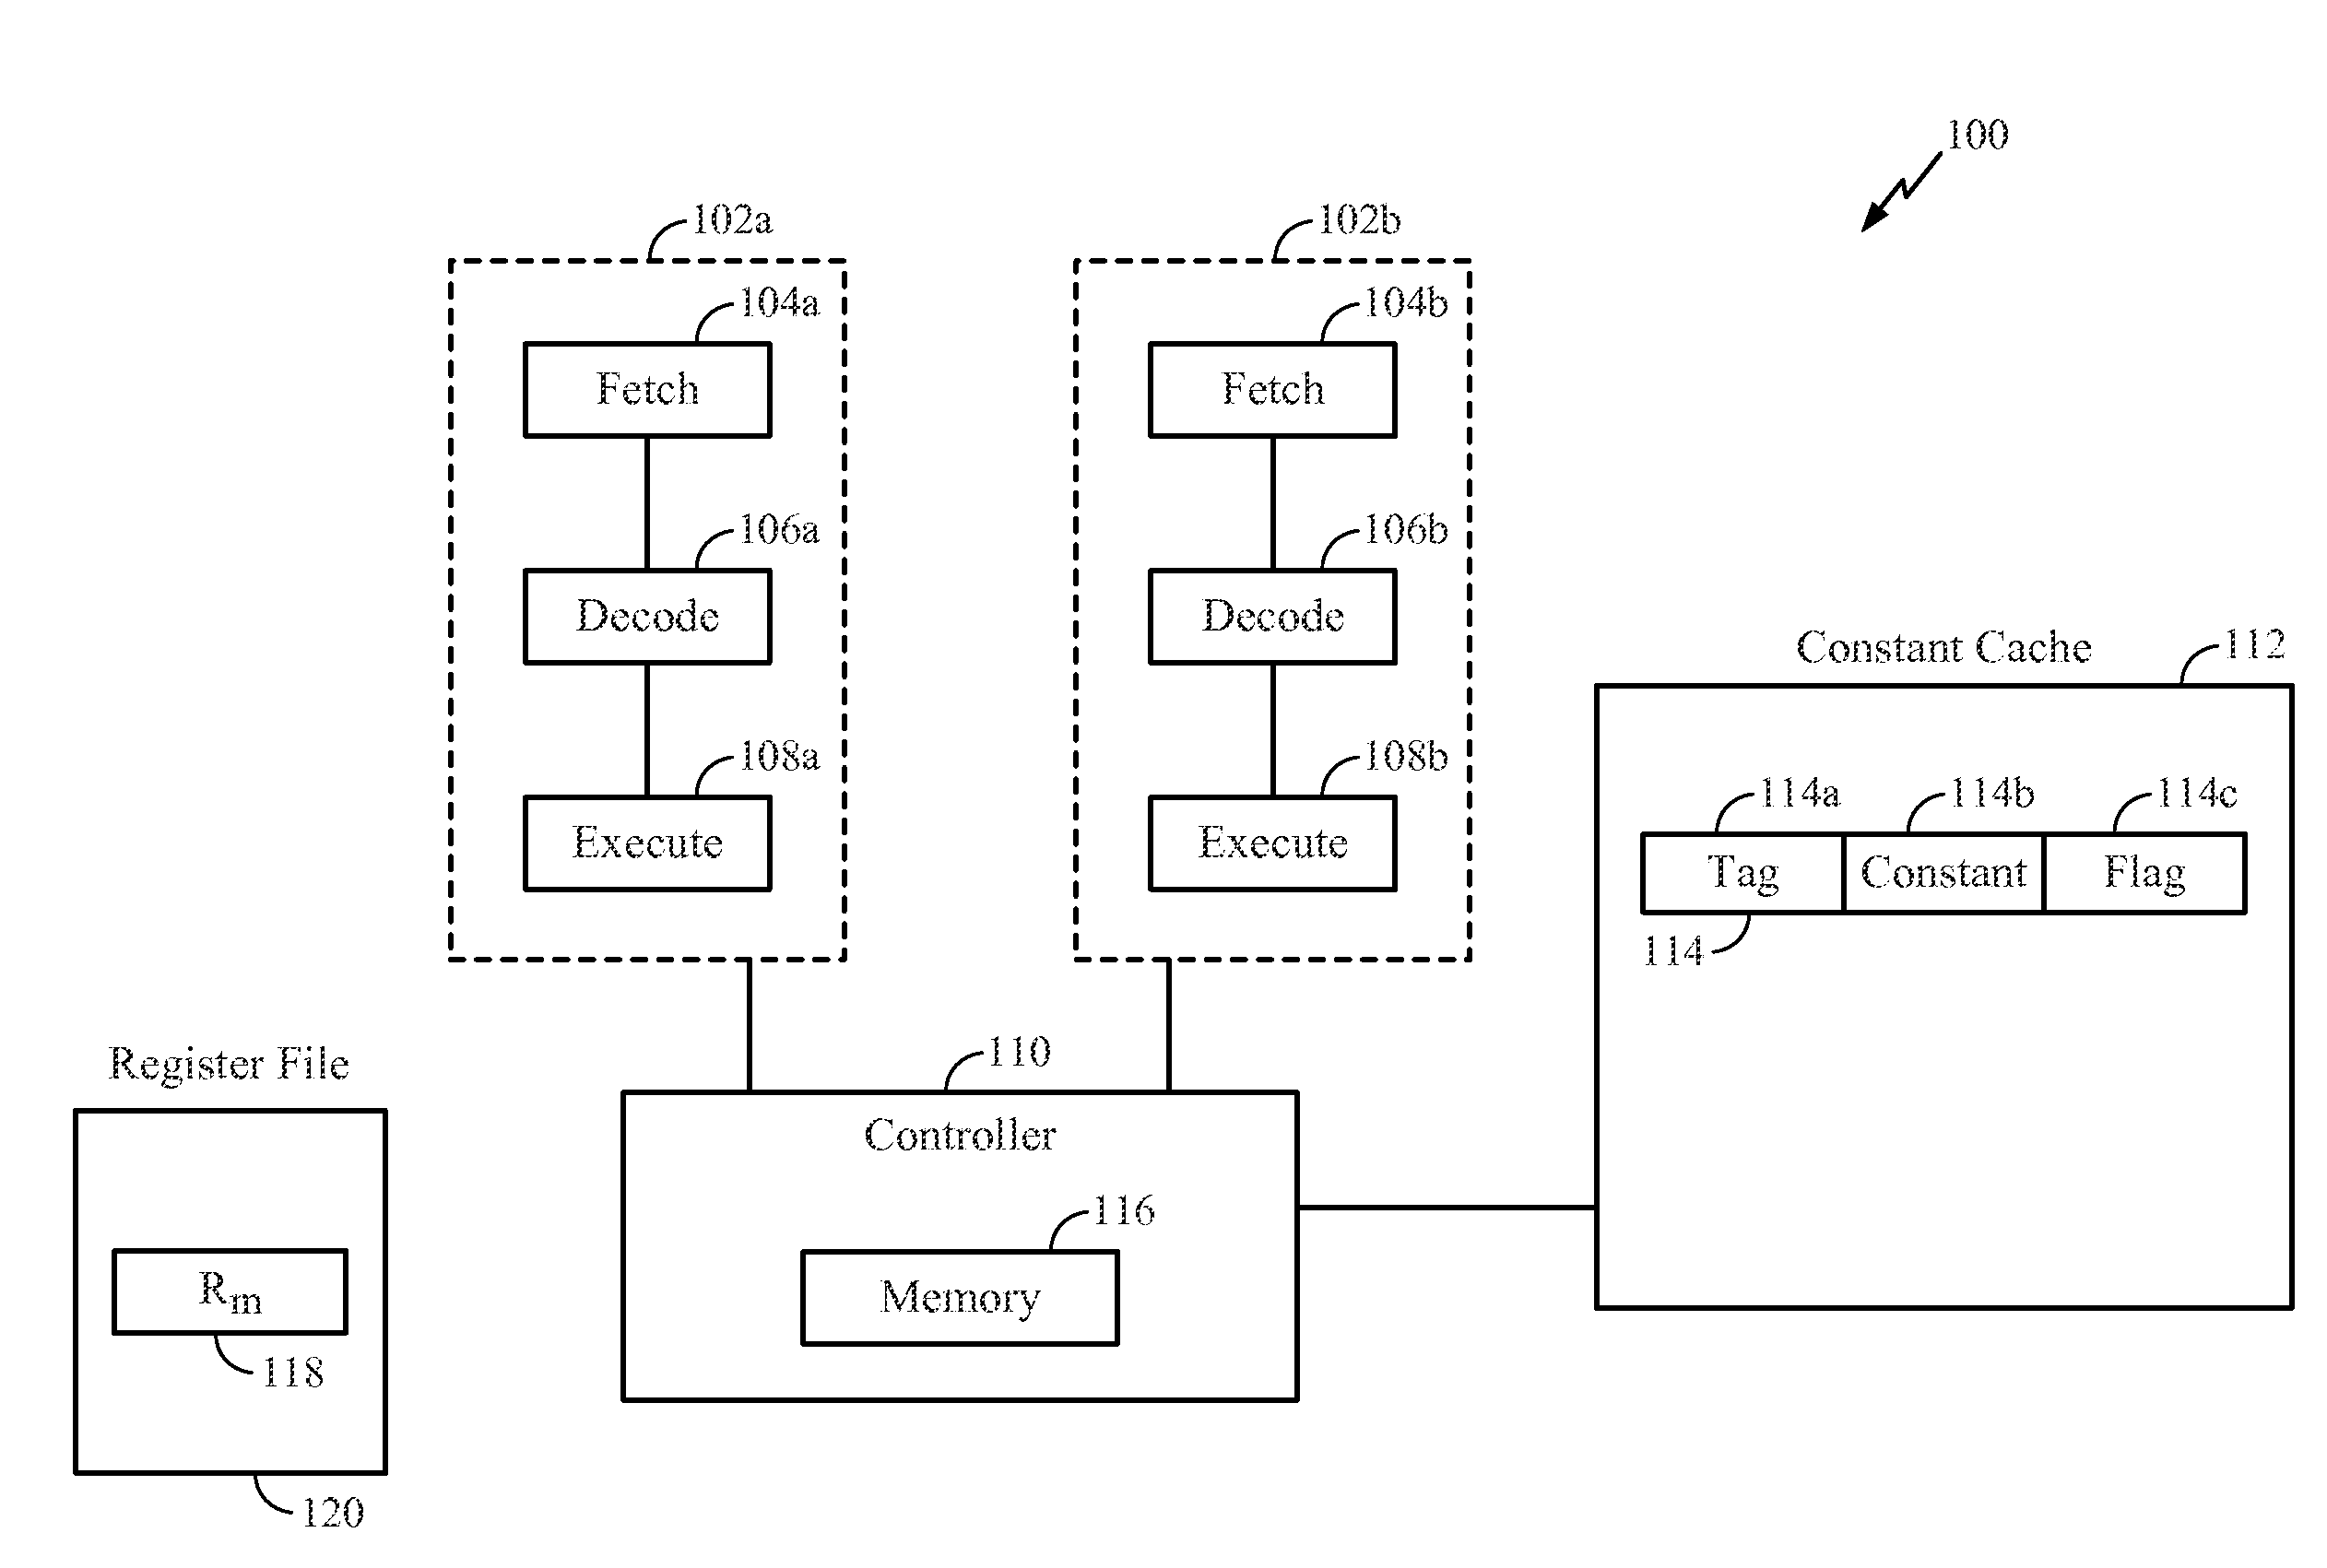 Method and apparatus for forwarding literal generated data to dependent instructions more efficiently using a constant cache